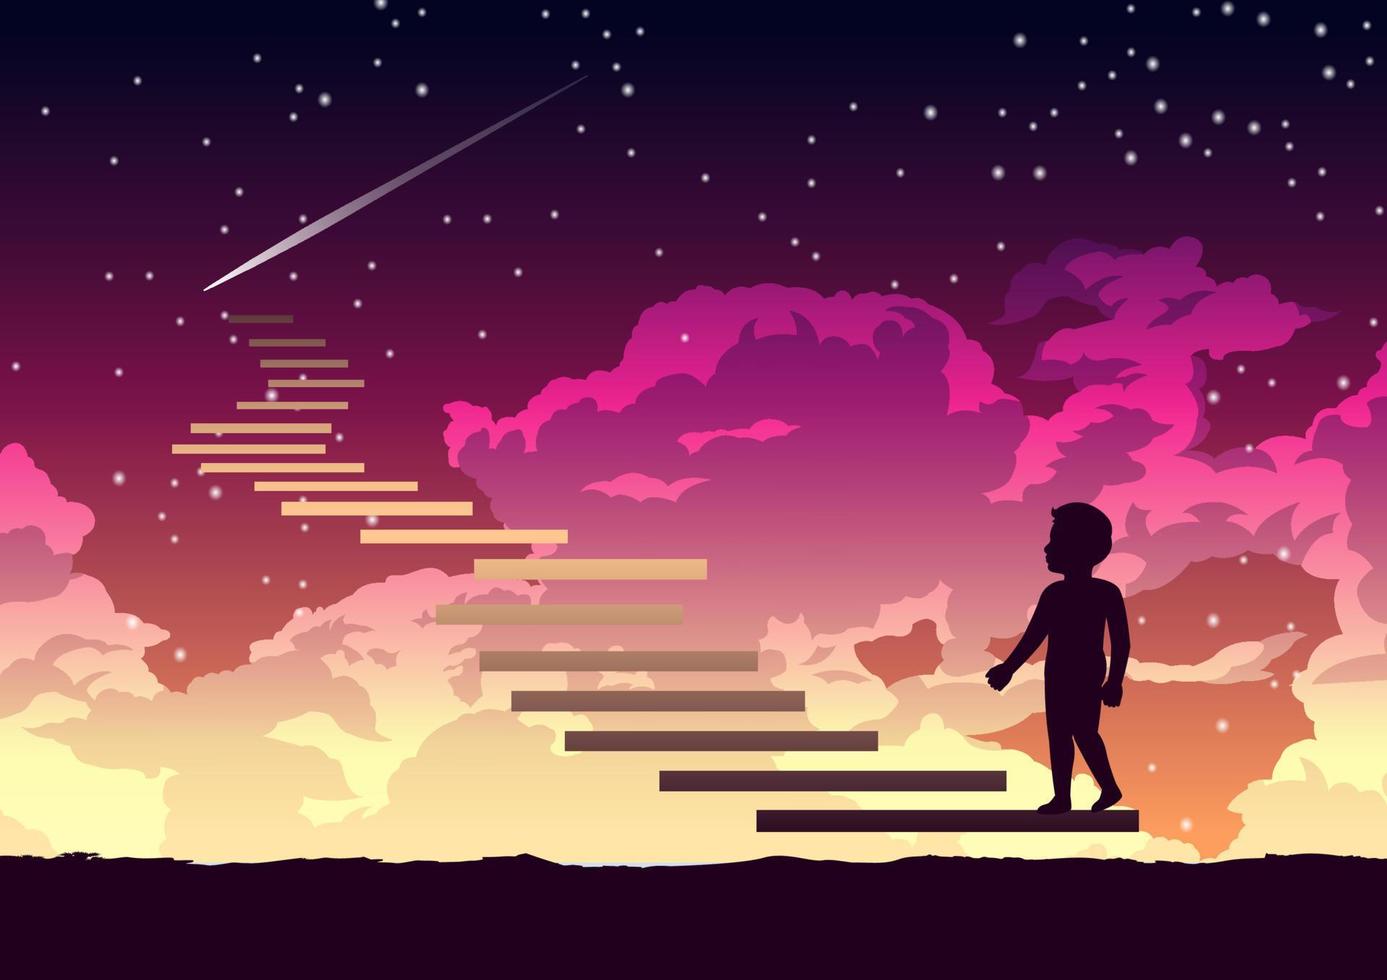 a boy step on the stair way to heaven with interesting vector